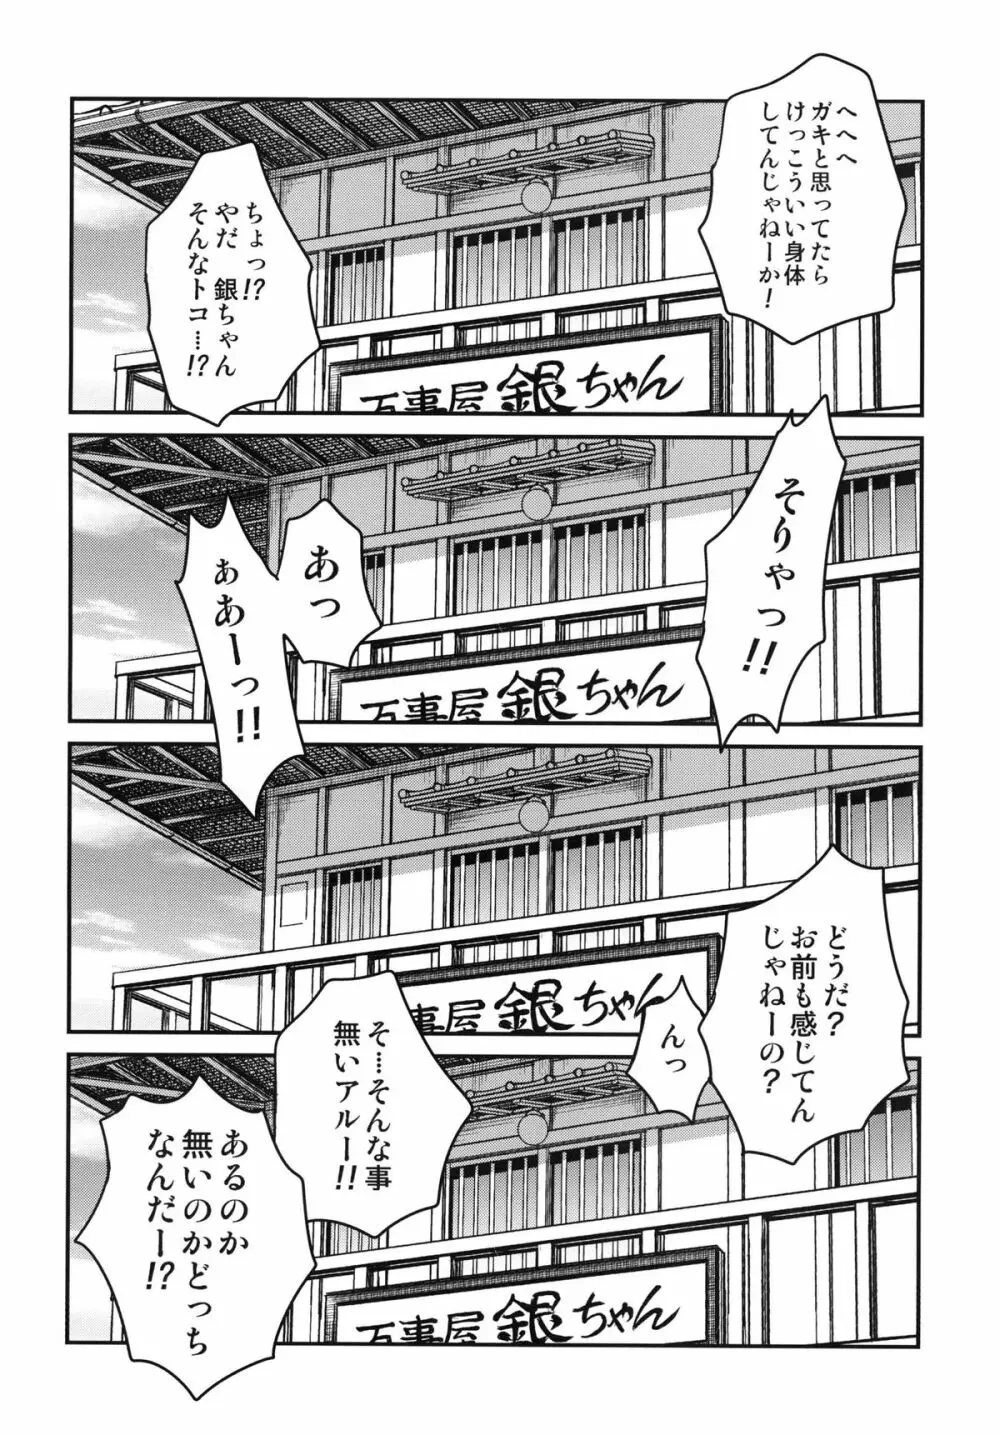 To LOVEる 月詠!! - page4